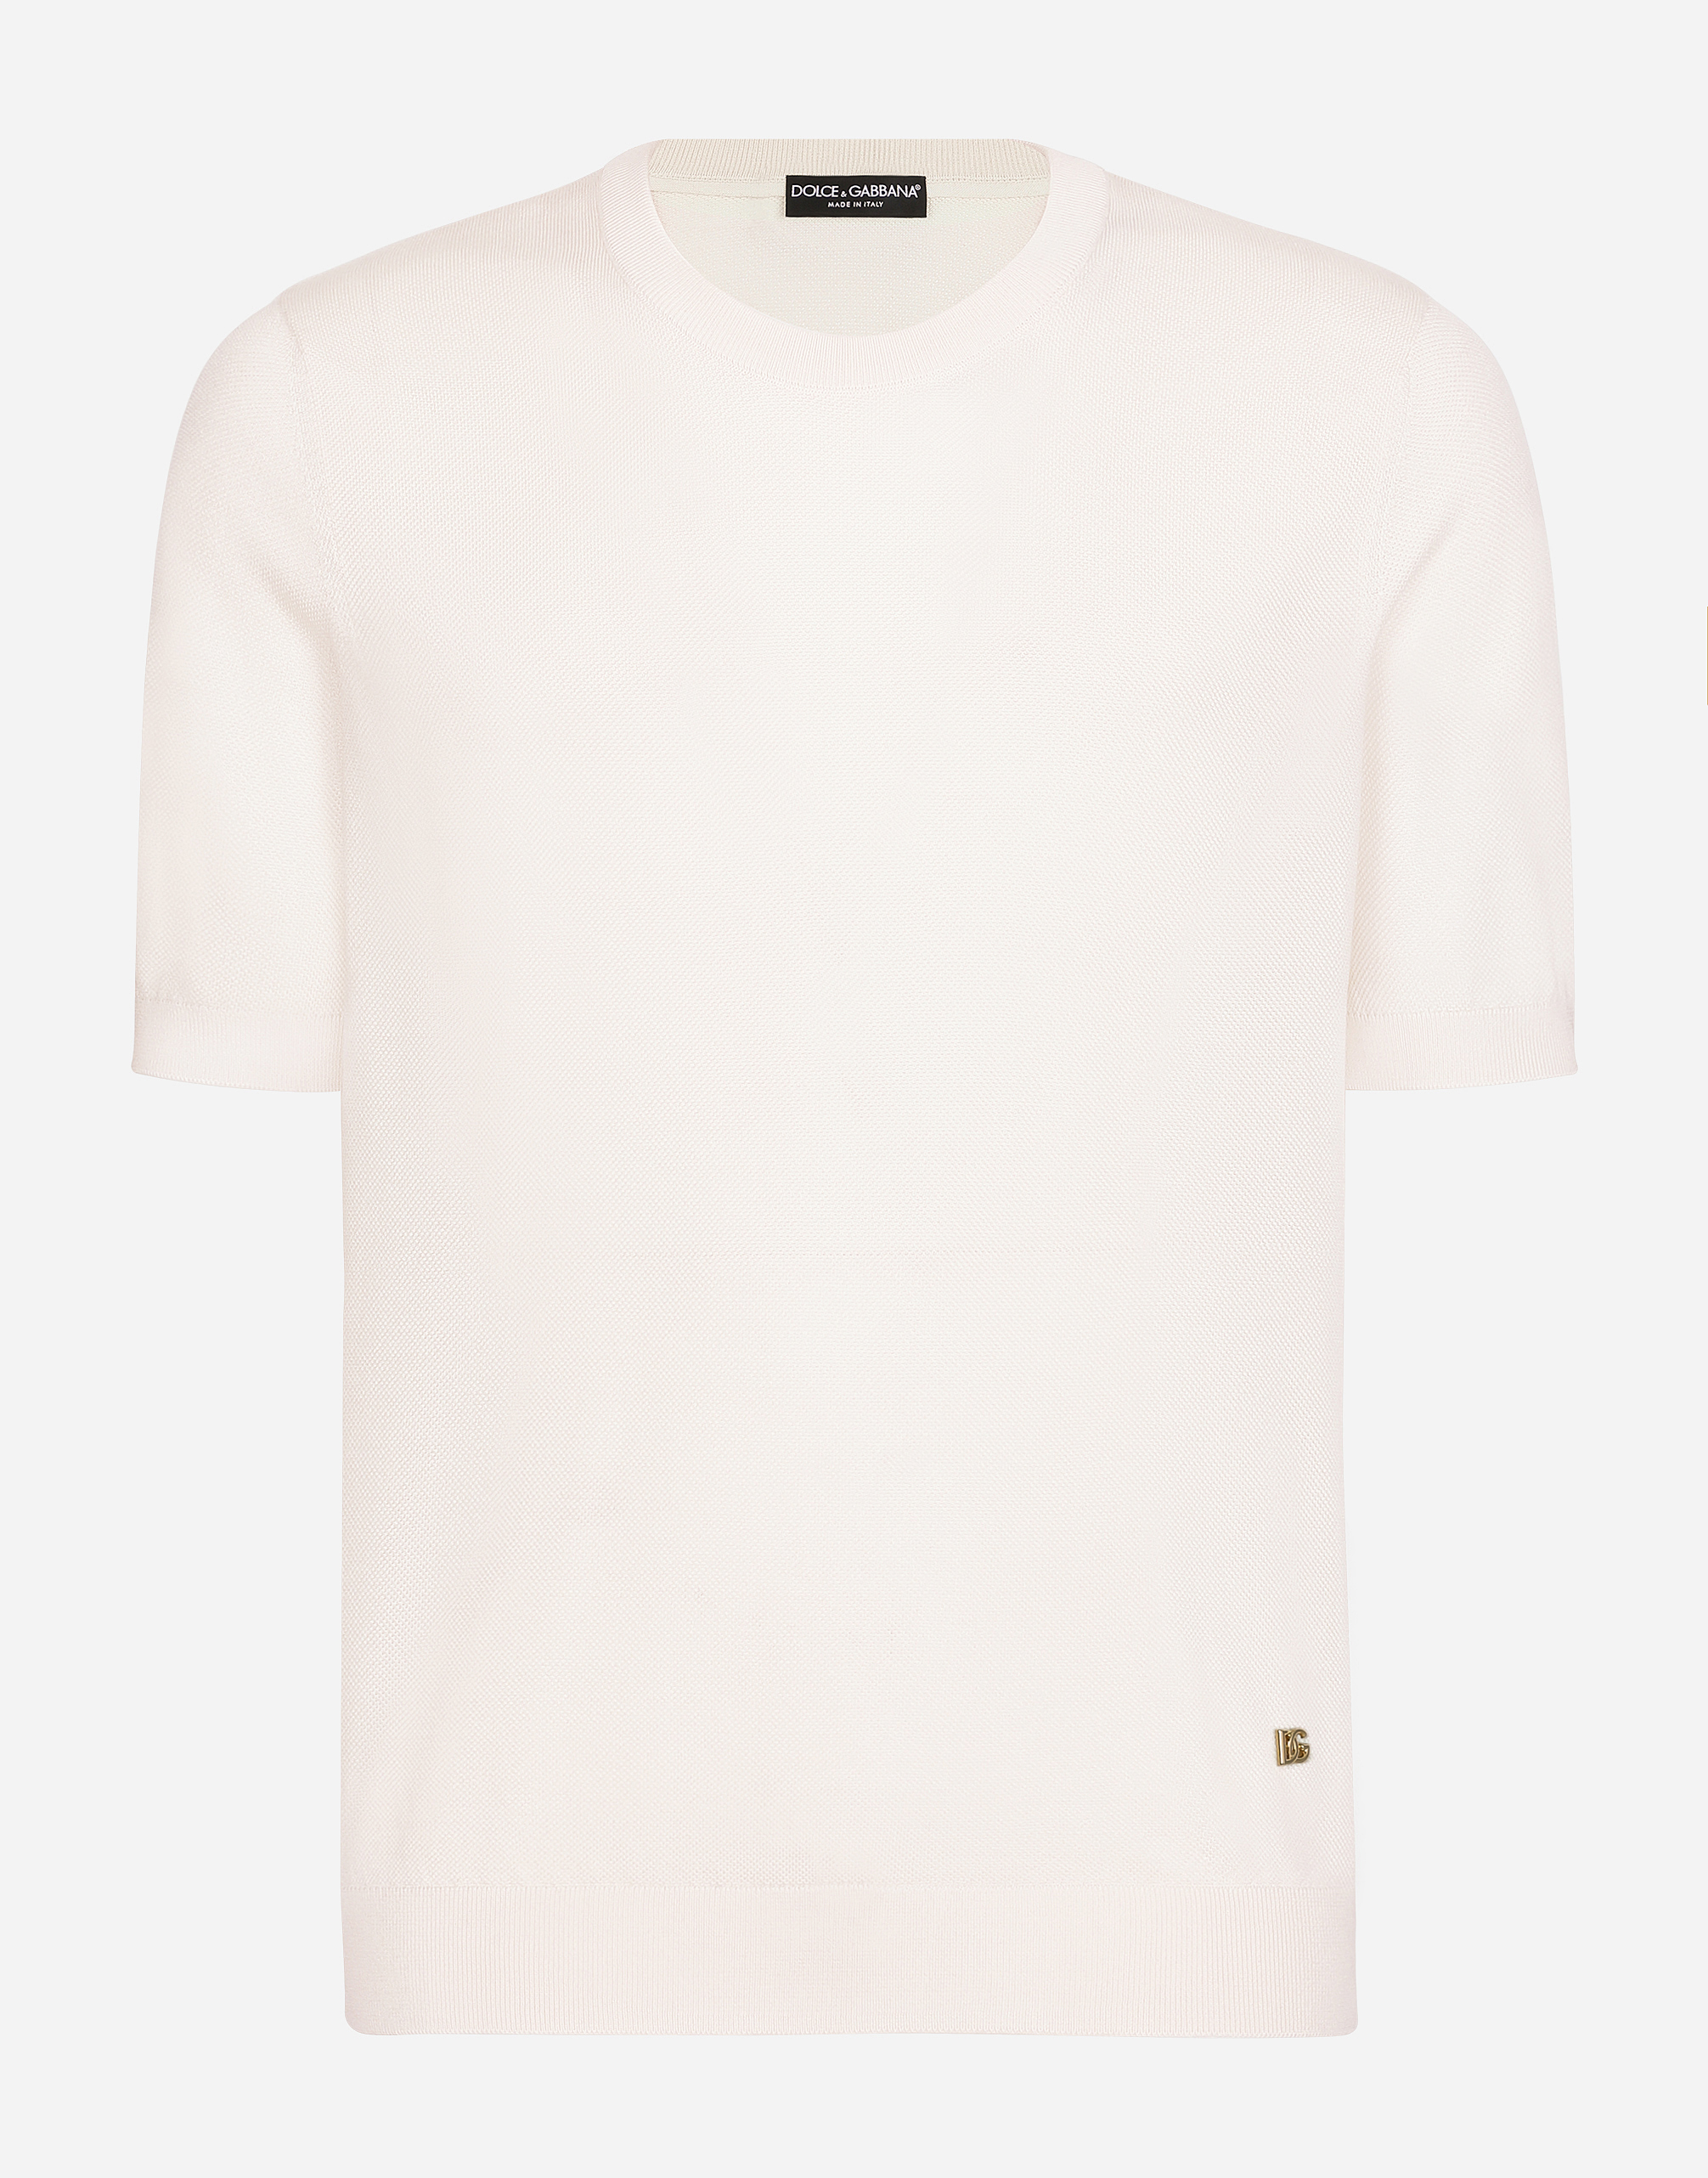 Short-sleeved round-neck sweater with DG logo in White